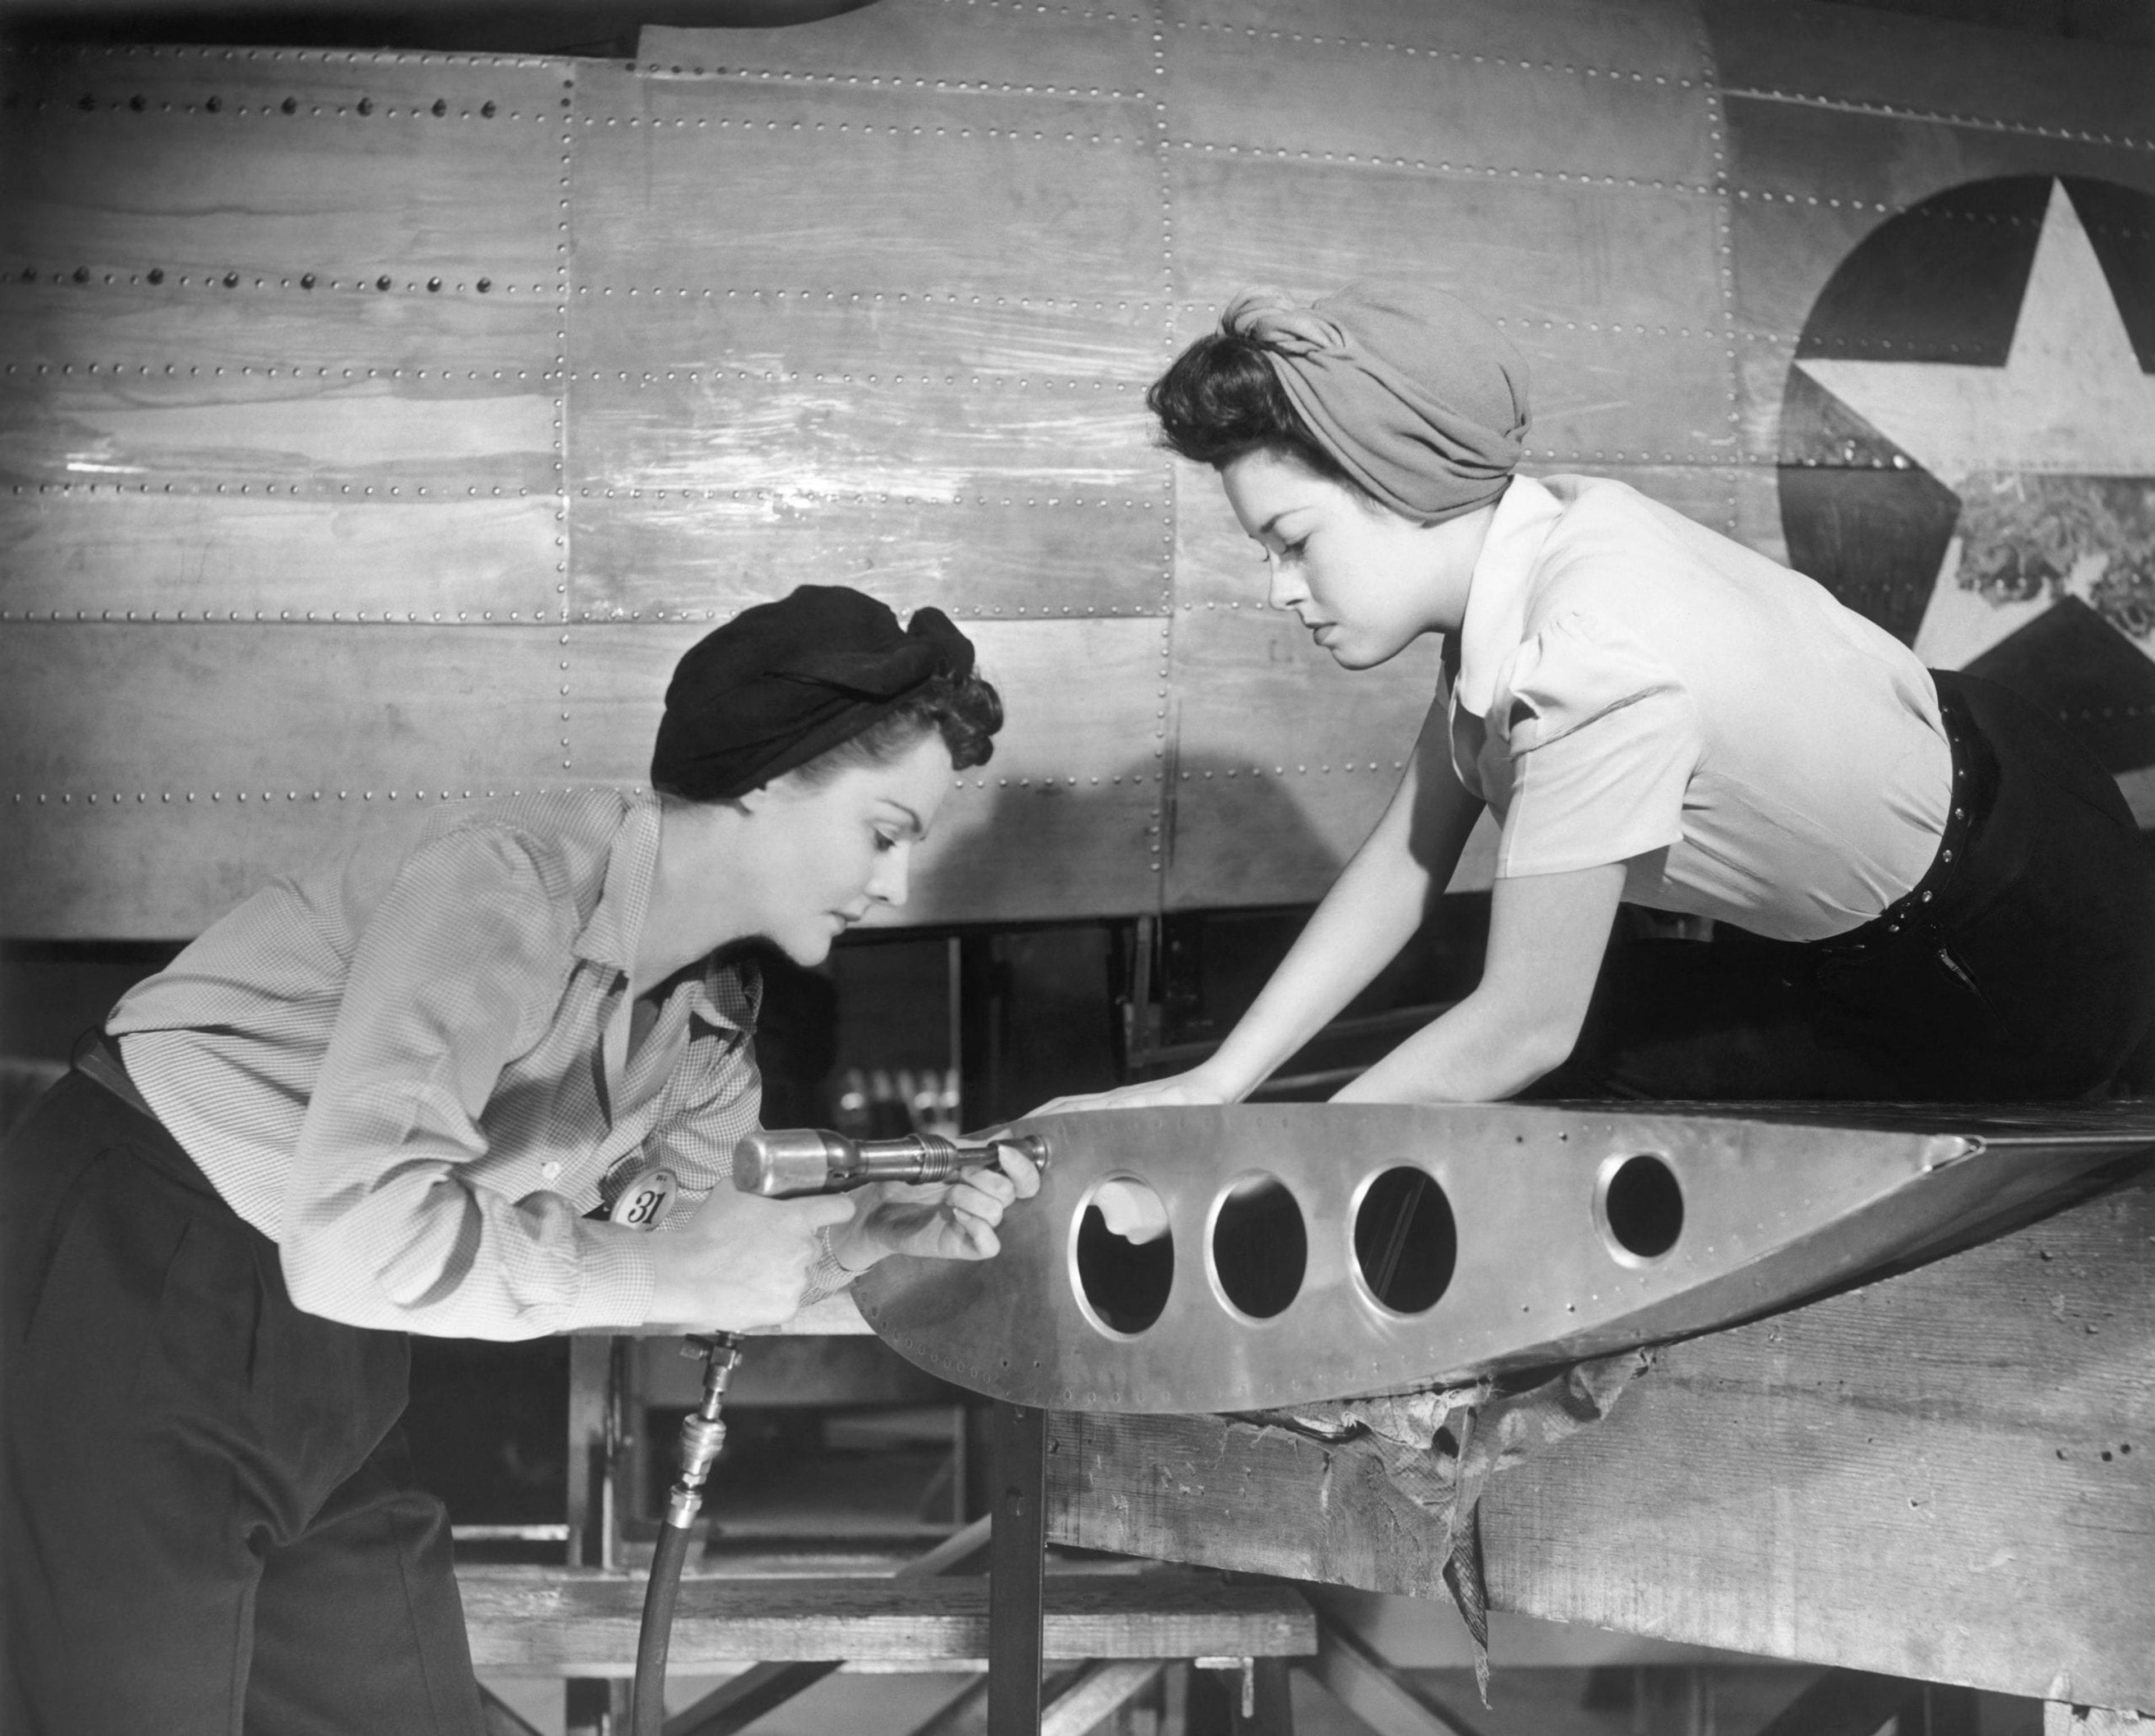 Women working at a plant during wartime